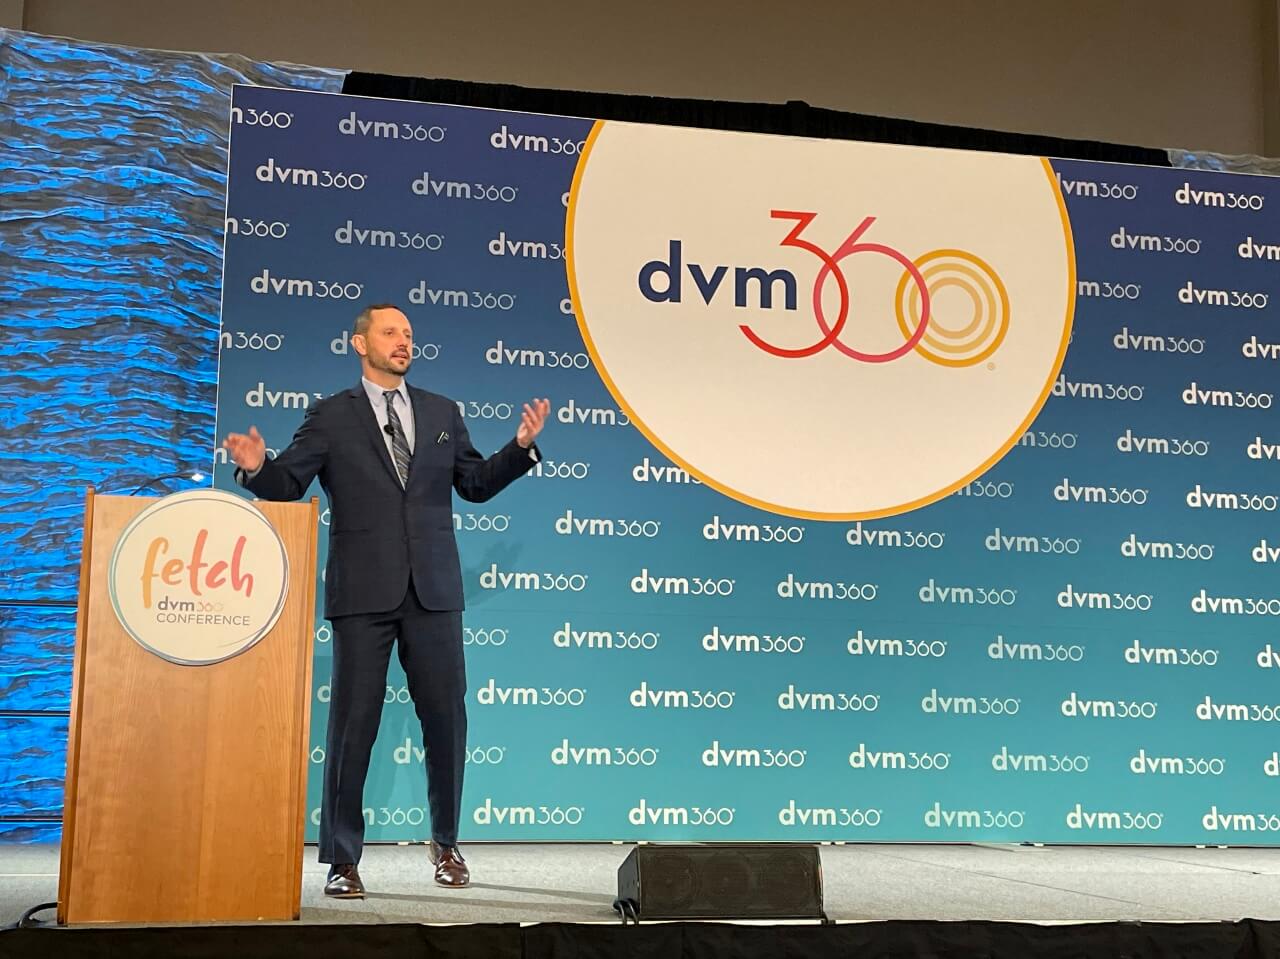 Matthew Brunke, DVM stands at a podium on stage at dvm360's Fetch San Diego 2021 conference